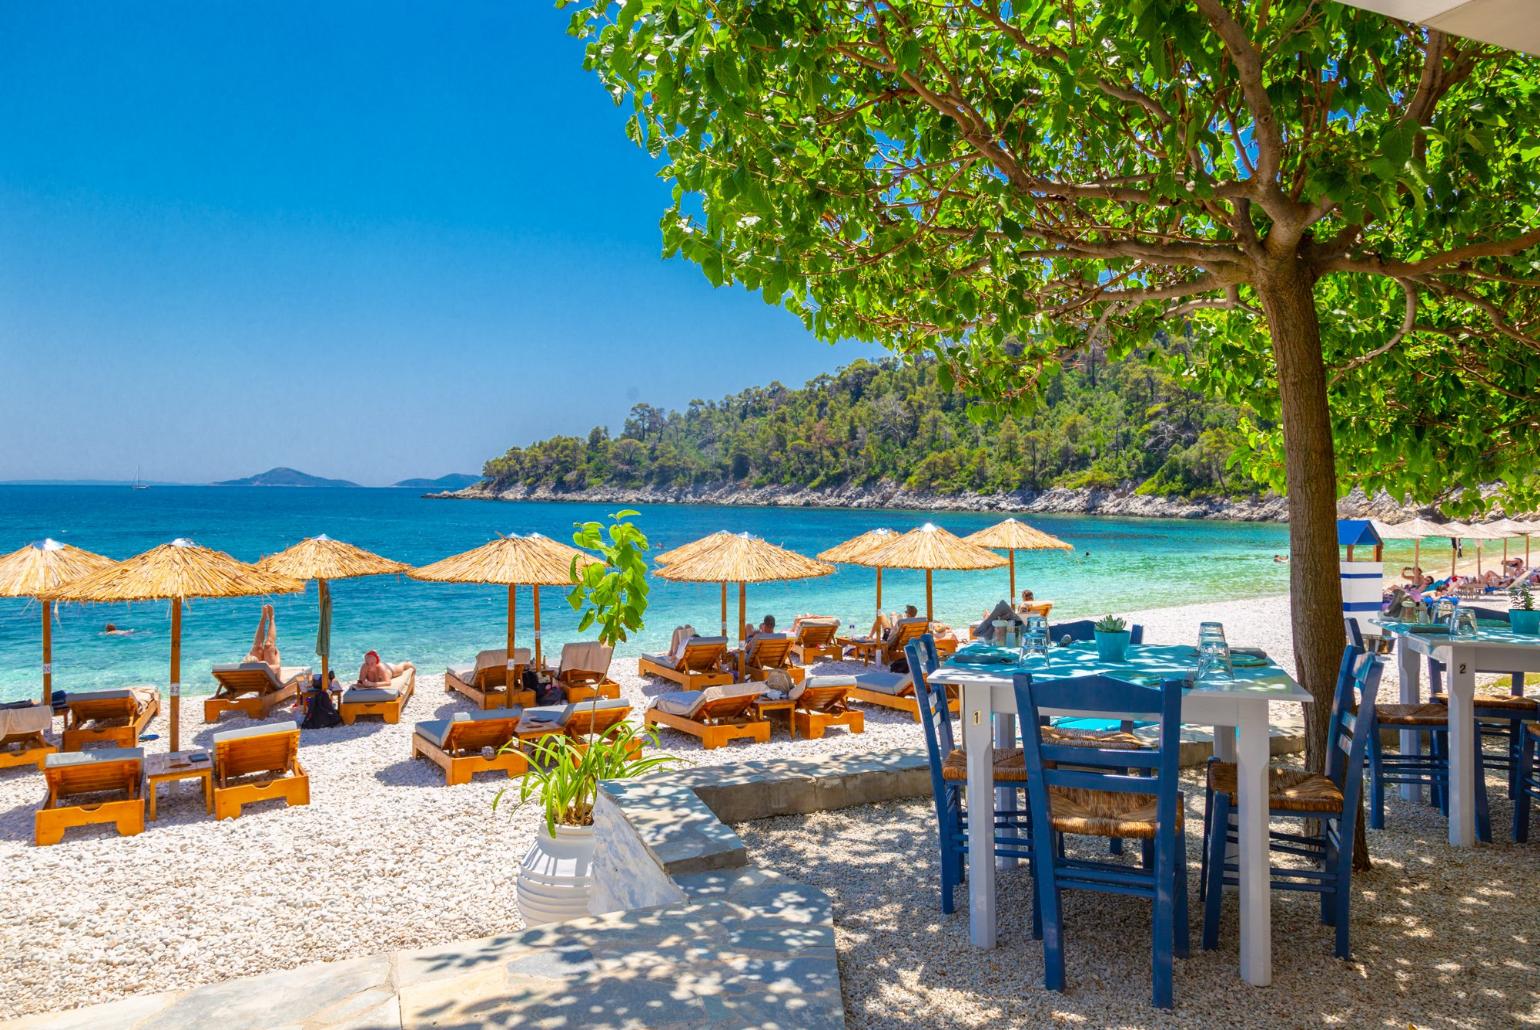 Leftos Gialos Beach - only a 1 minute walk from Neptune